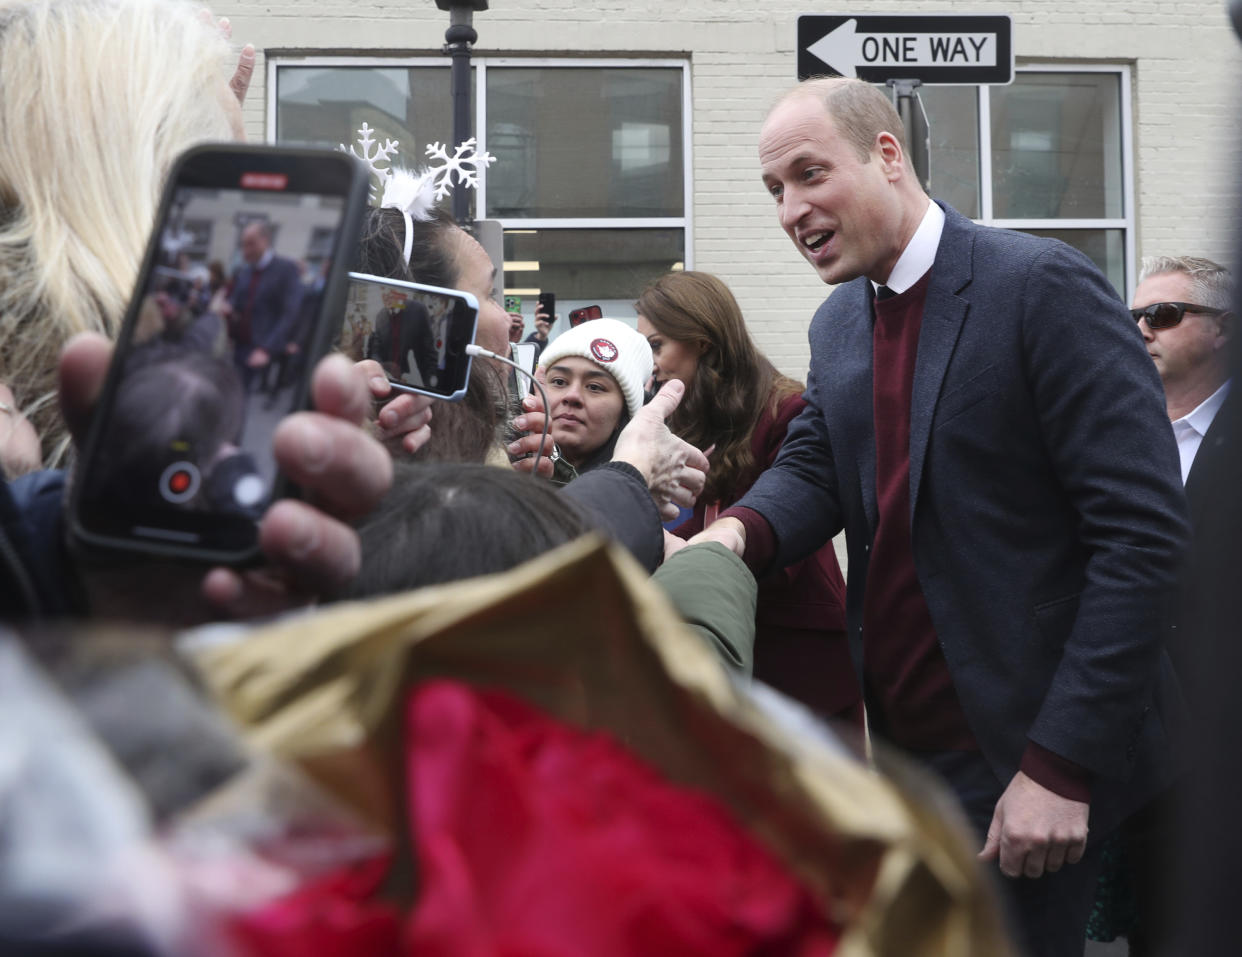 Britain's Prince William greets people in the crowd after a visit to Roca on Thursday, Dec. 1, 2022, in Chelsea, Ma. (Nancy Lane/The Boston Herald via AP, Pool)